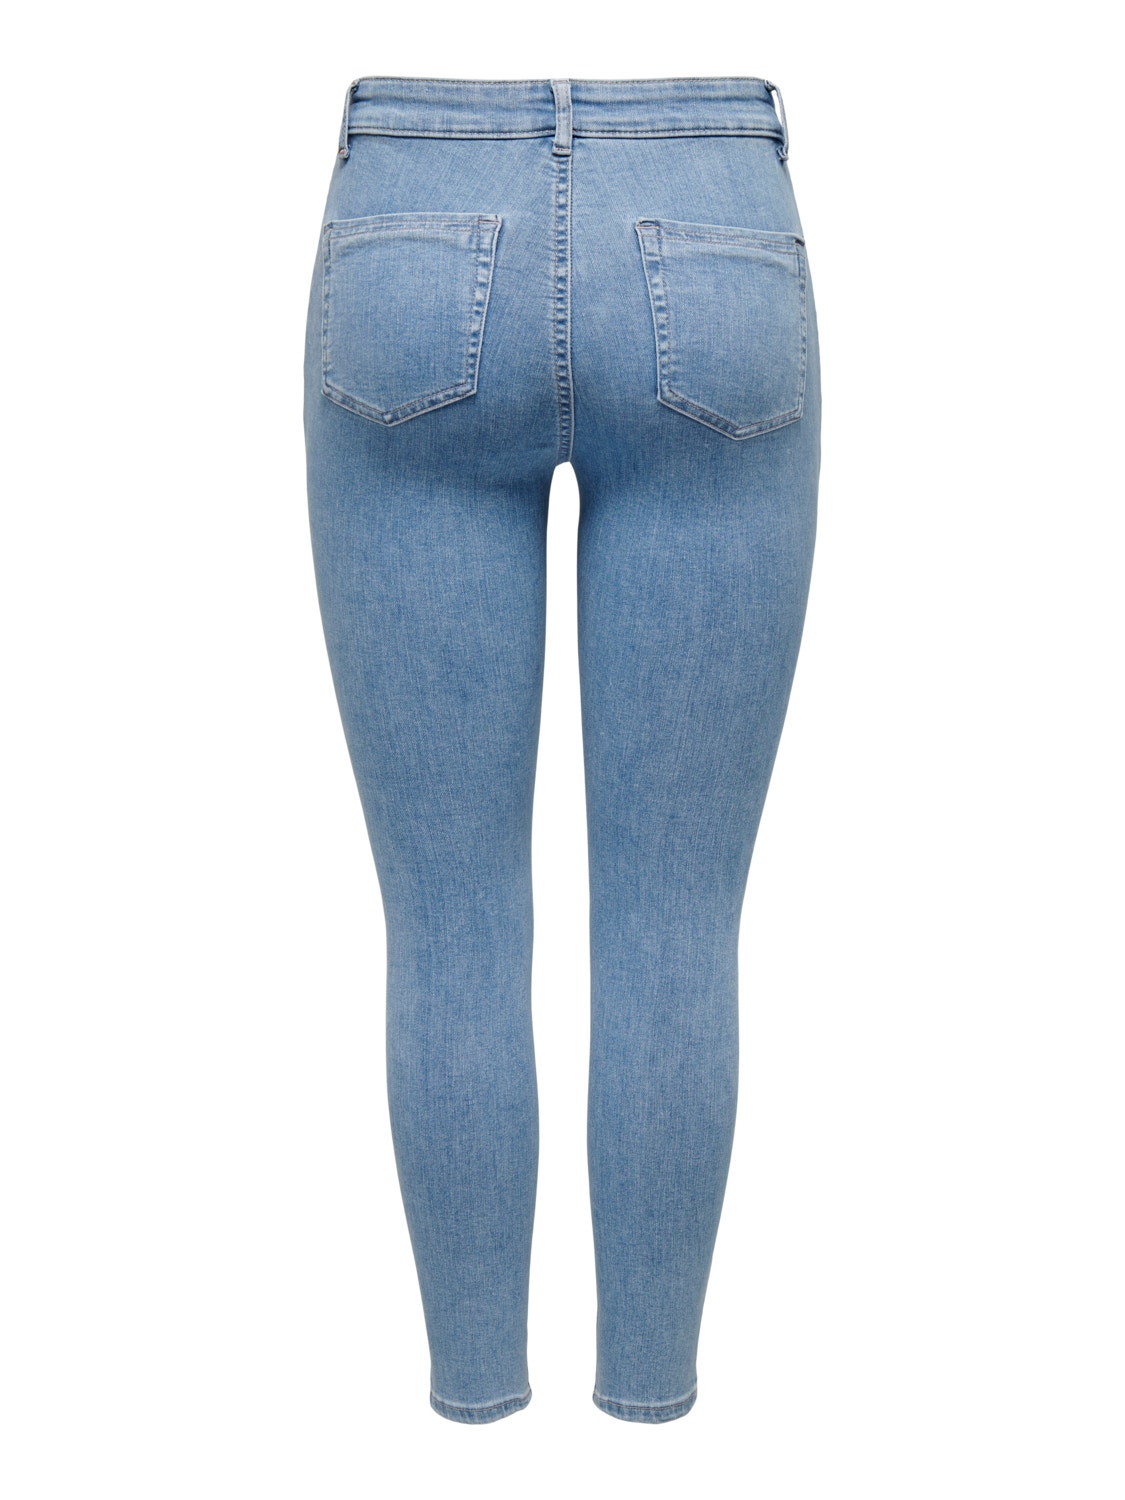 ONLY Skinny Fit Hohe Taille Jeans -Light Blue Denim - 15259336